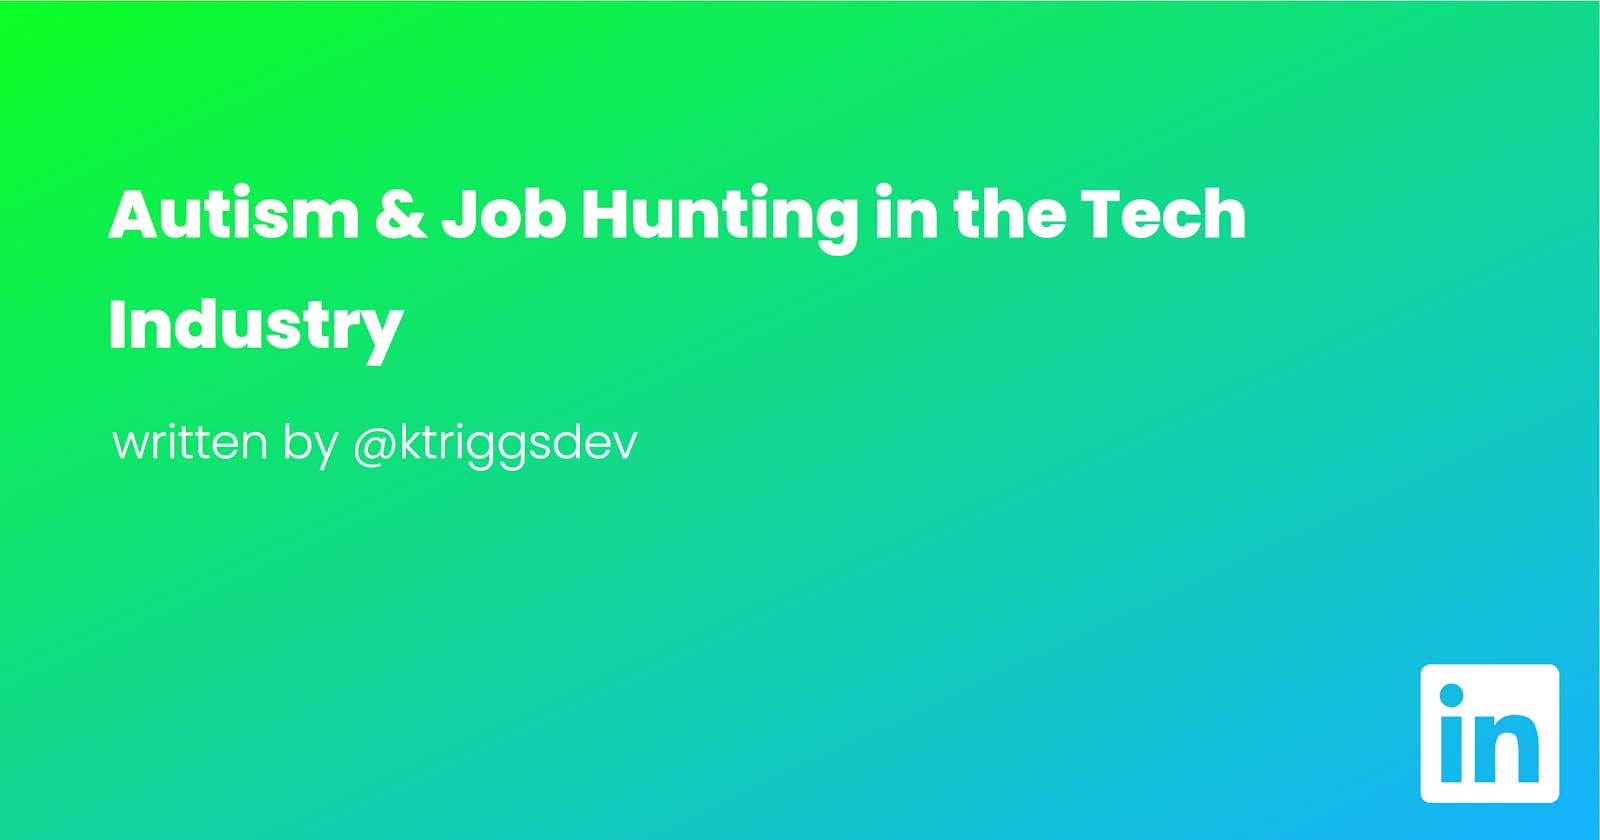 Autism & Job Hunting in the Tech Industry